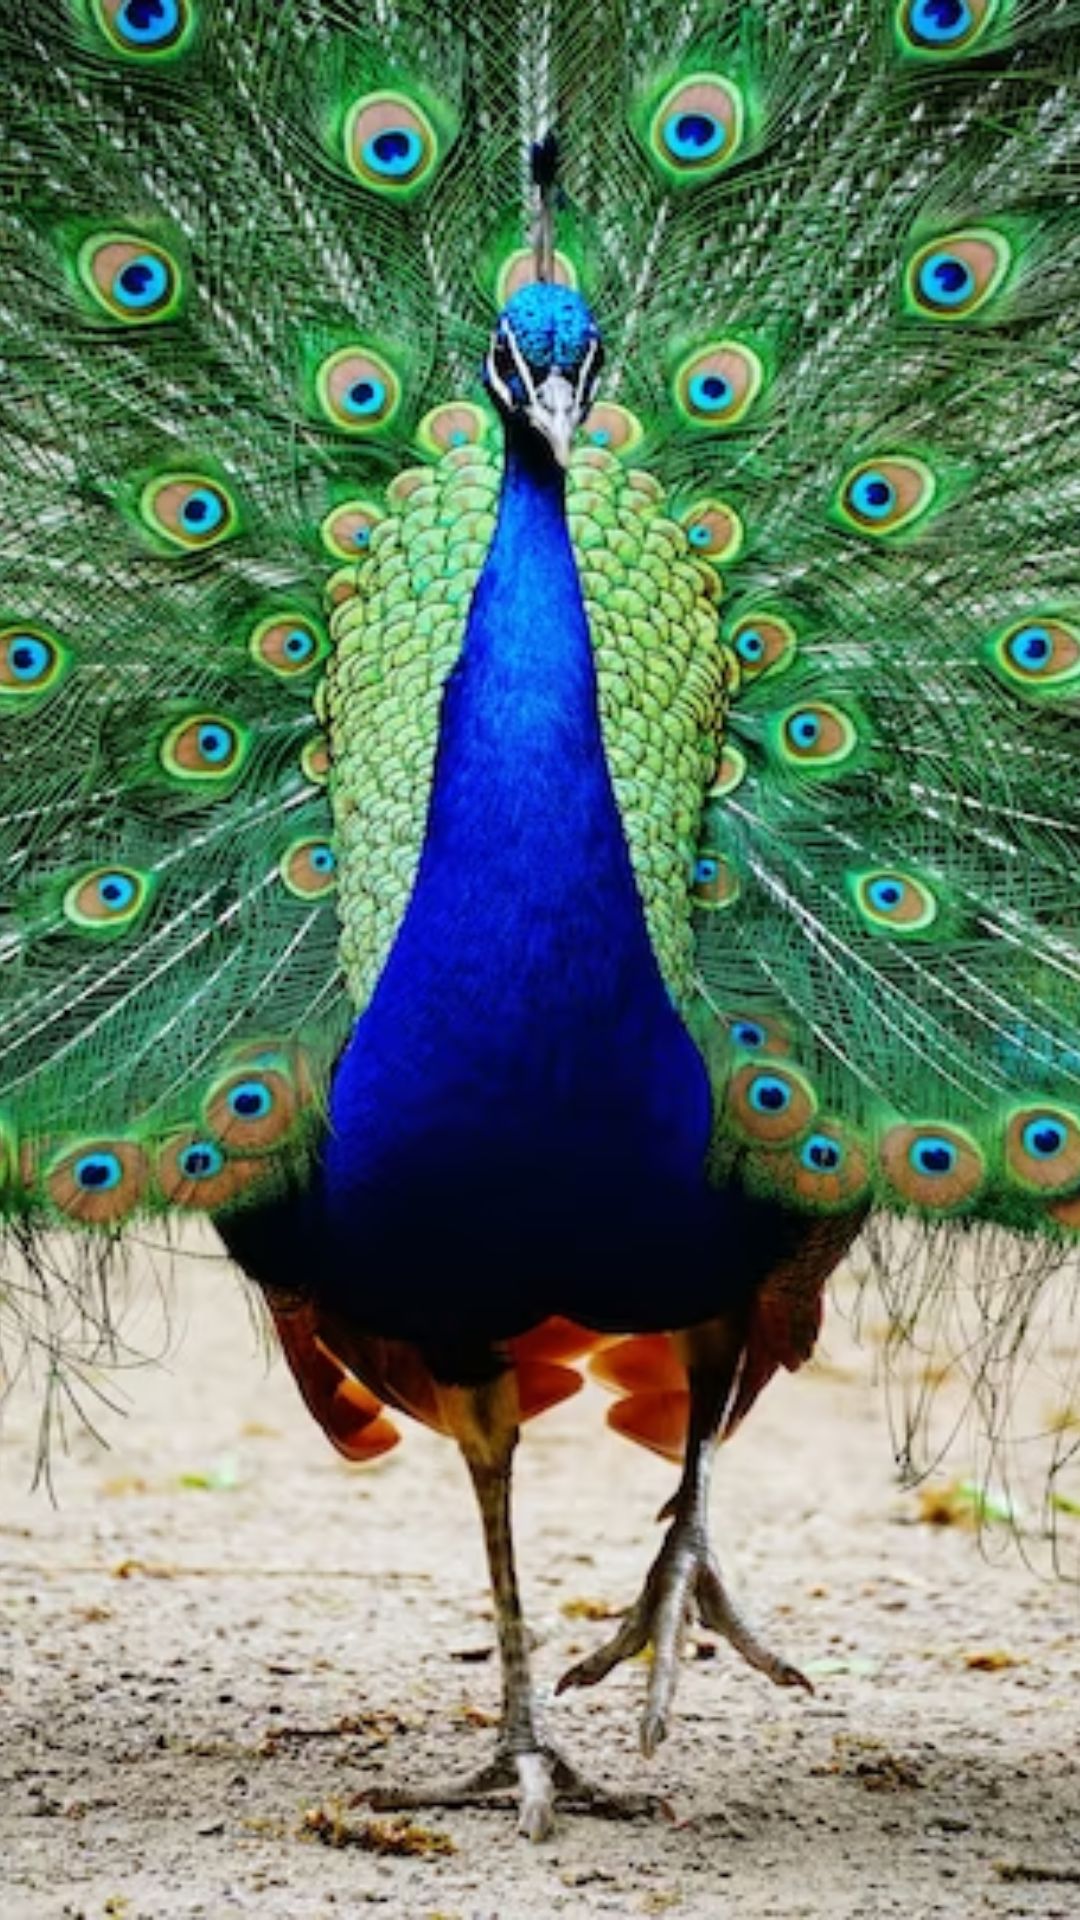 1. Indian Peafowl: Also known as the national bird of India, this magnificent bird is admired for its iridescent blue and green plumage. 